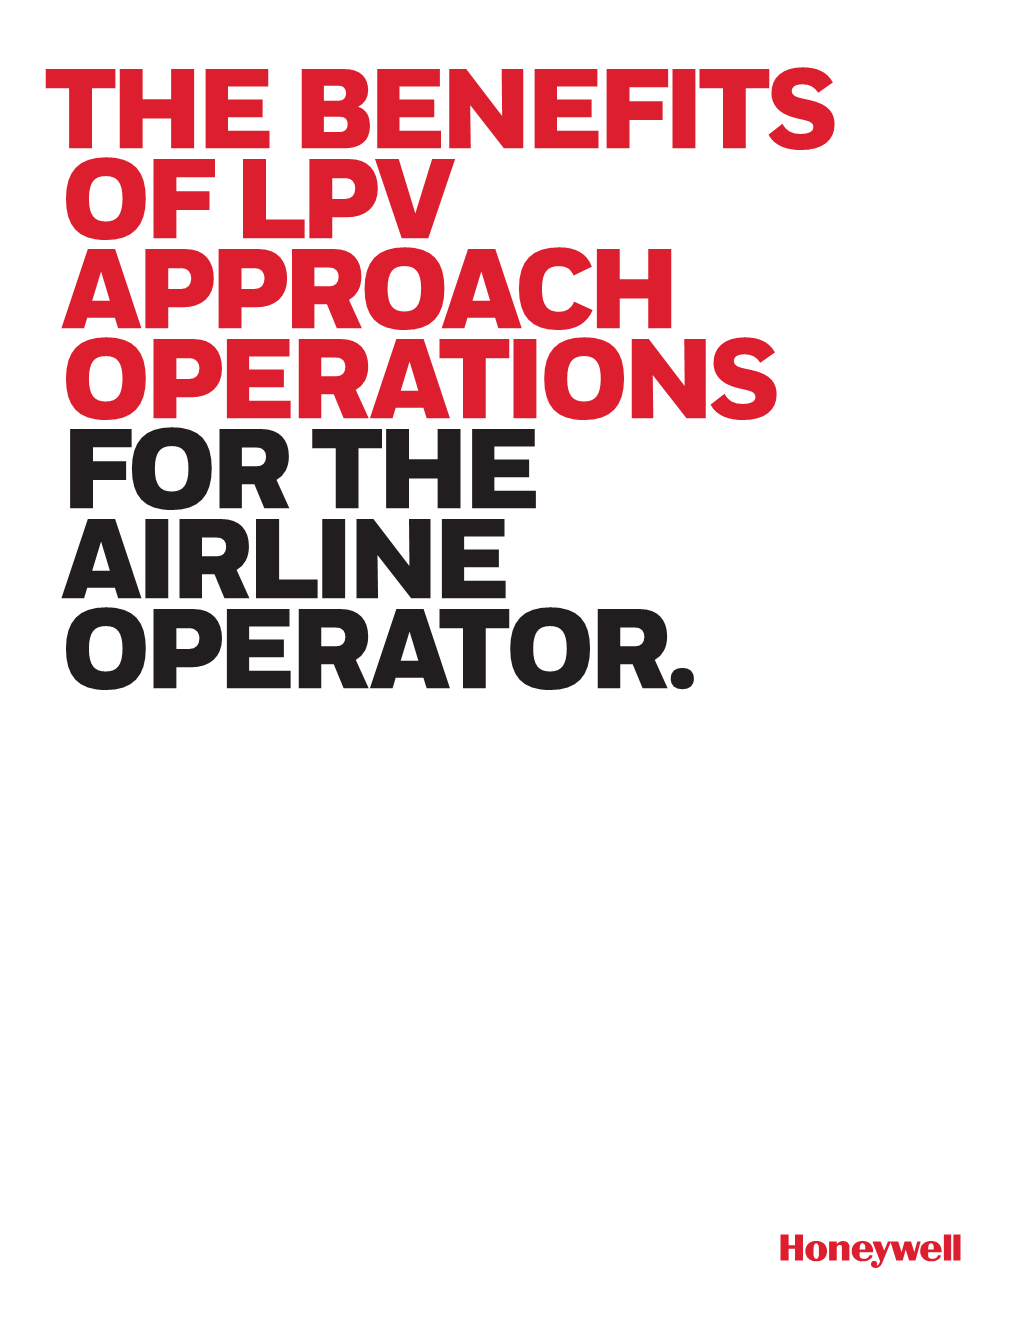 Lpv Approach Operations for the Airline